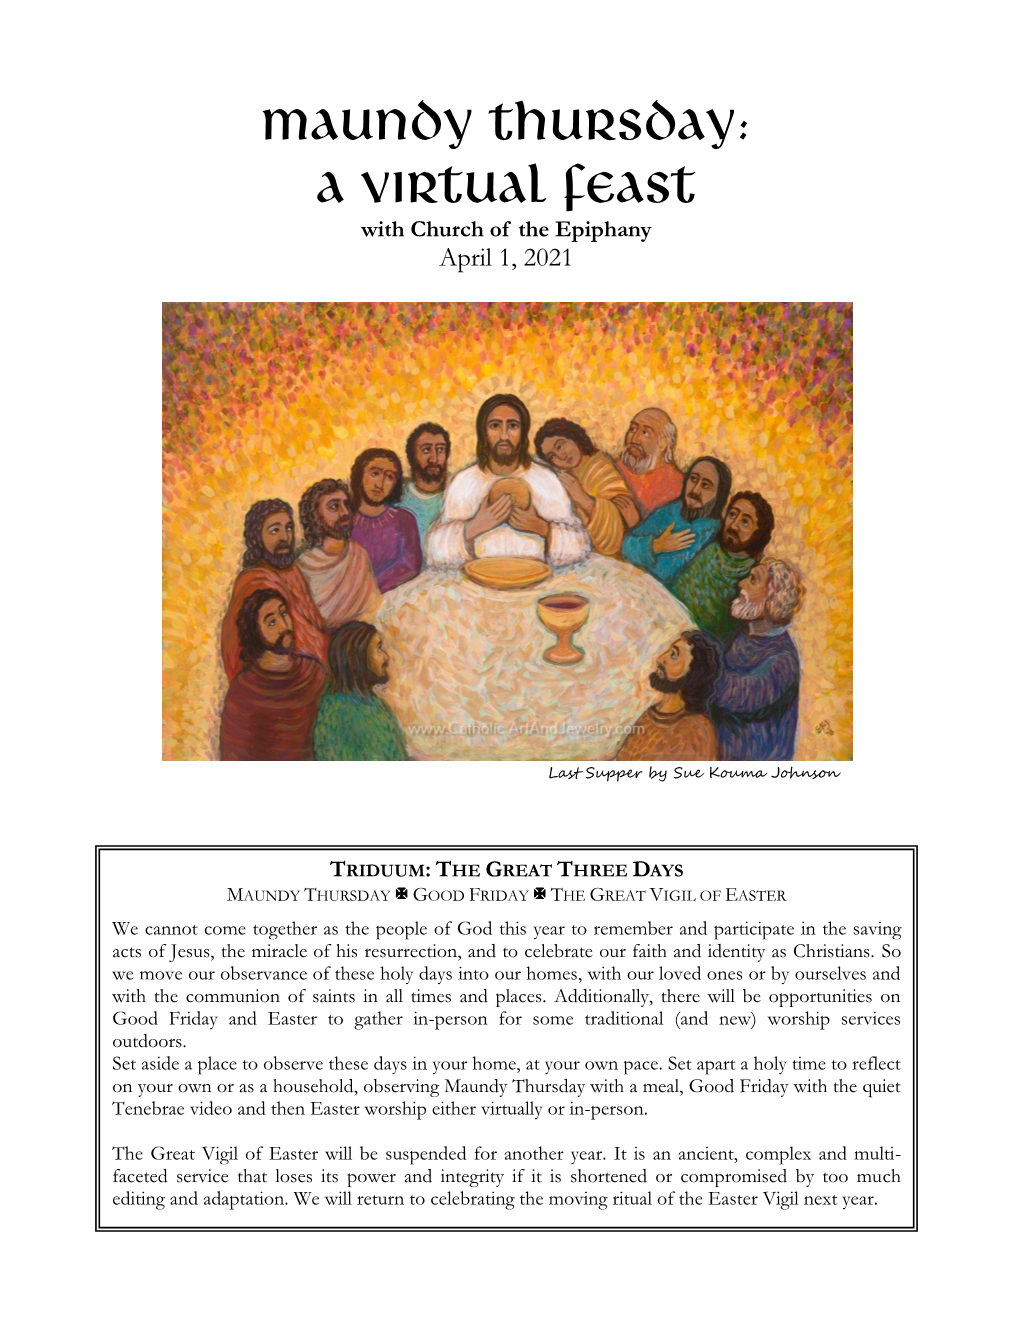 MAUNDY THURSDAY: a VIRTUAL FEAST with Church of the Epiphany April 1, 2021